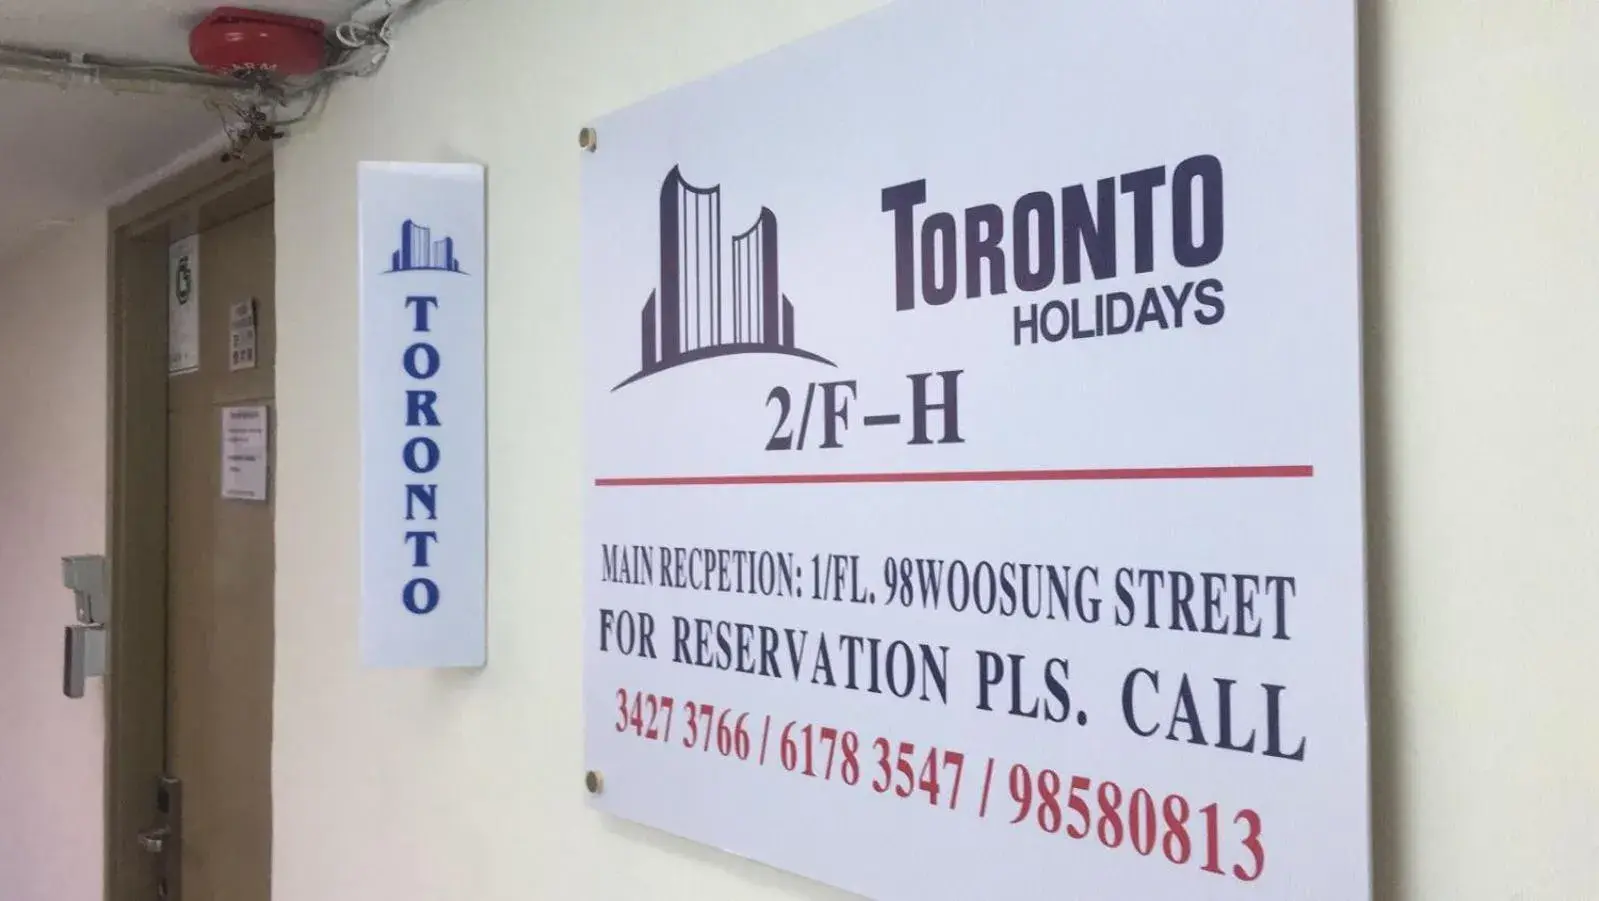 Property logo or sign in Toronto Holidays